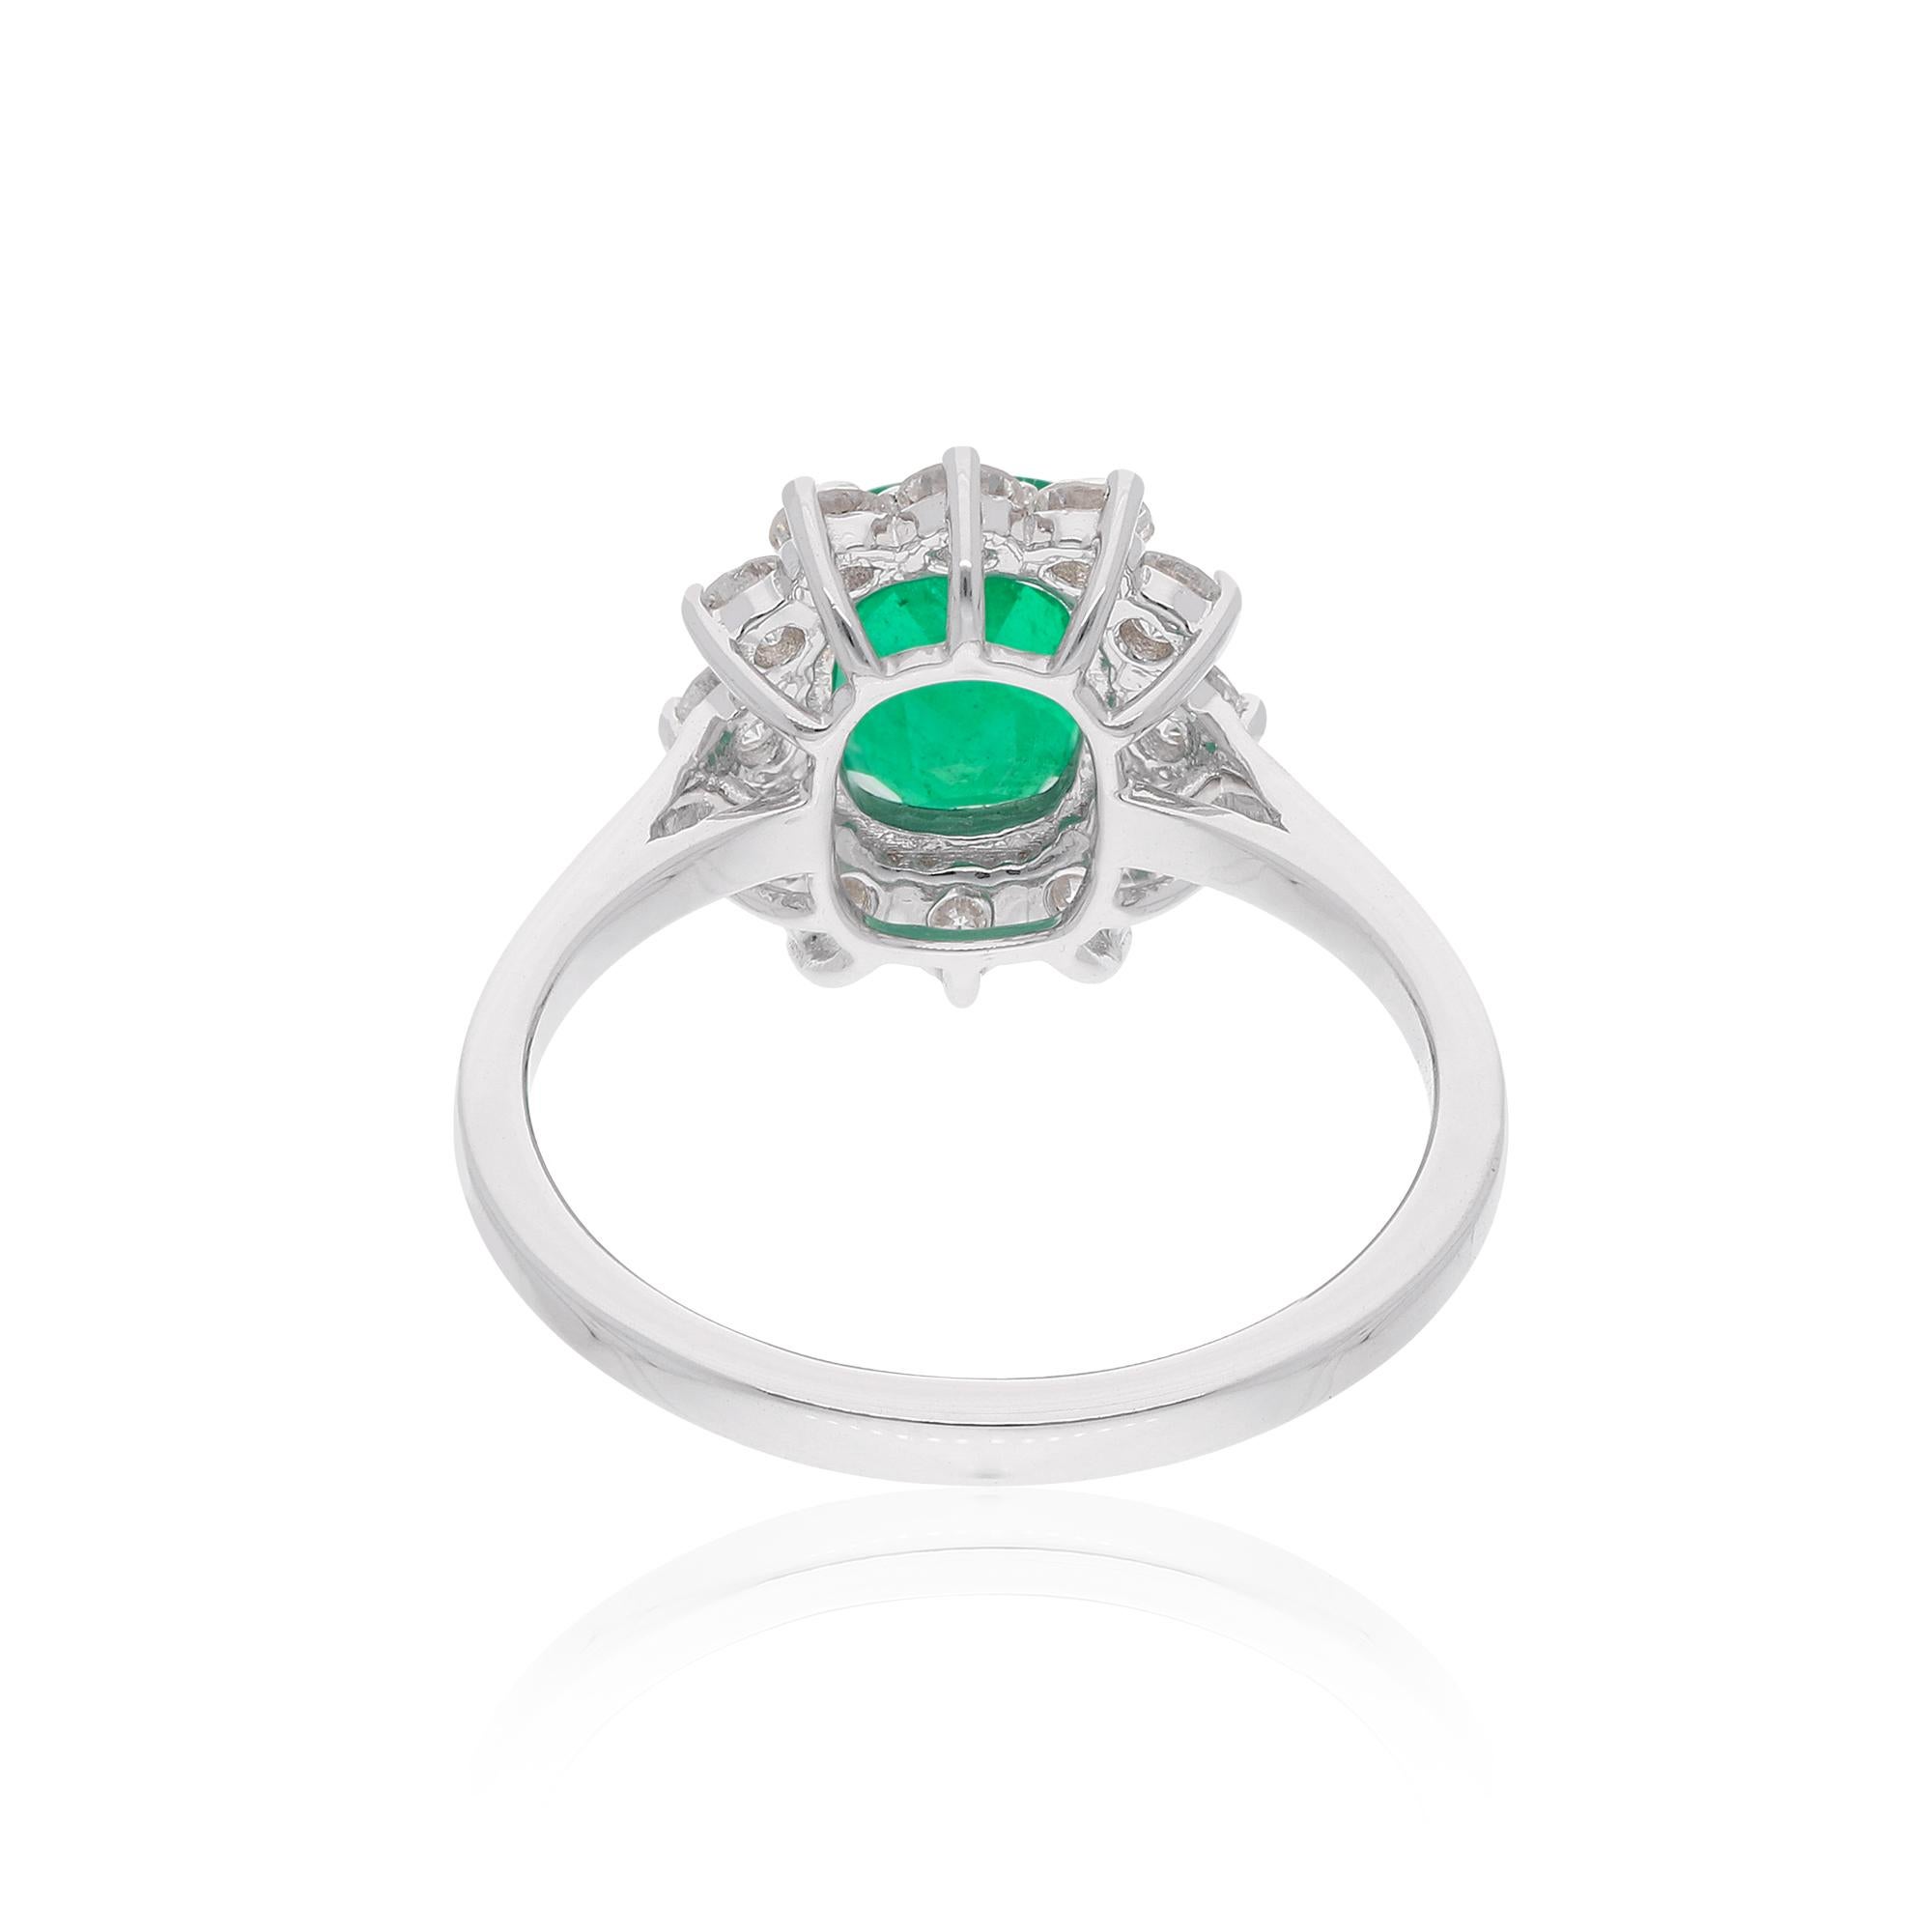 Item Code :- SER-22594
Gross Wt. :- 3.82 gm
18k White Gold Wt. :- 3.39 gm
Natural Diamond Wt. :- 0.75 Ct. ( AVERAGE DIAMOND CLARITY SI1-SI2 & COLOR H-I )
Emerald Wt. :- 1.40 Ct.
Ring Size :- 7 US & All size available

✦